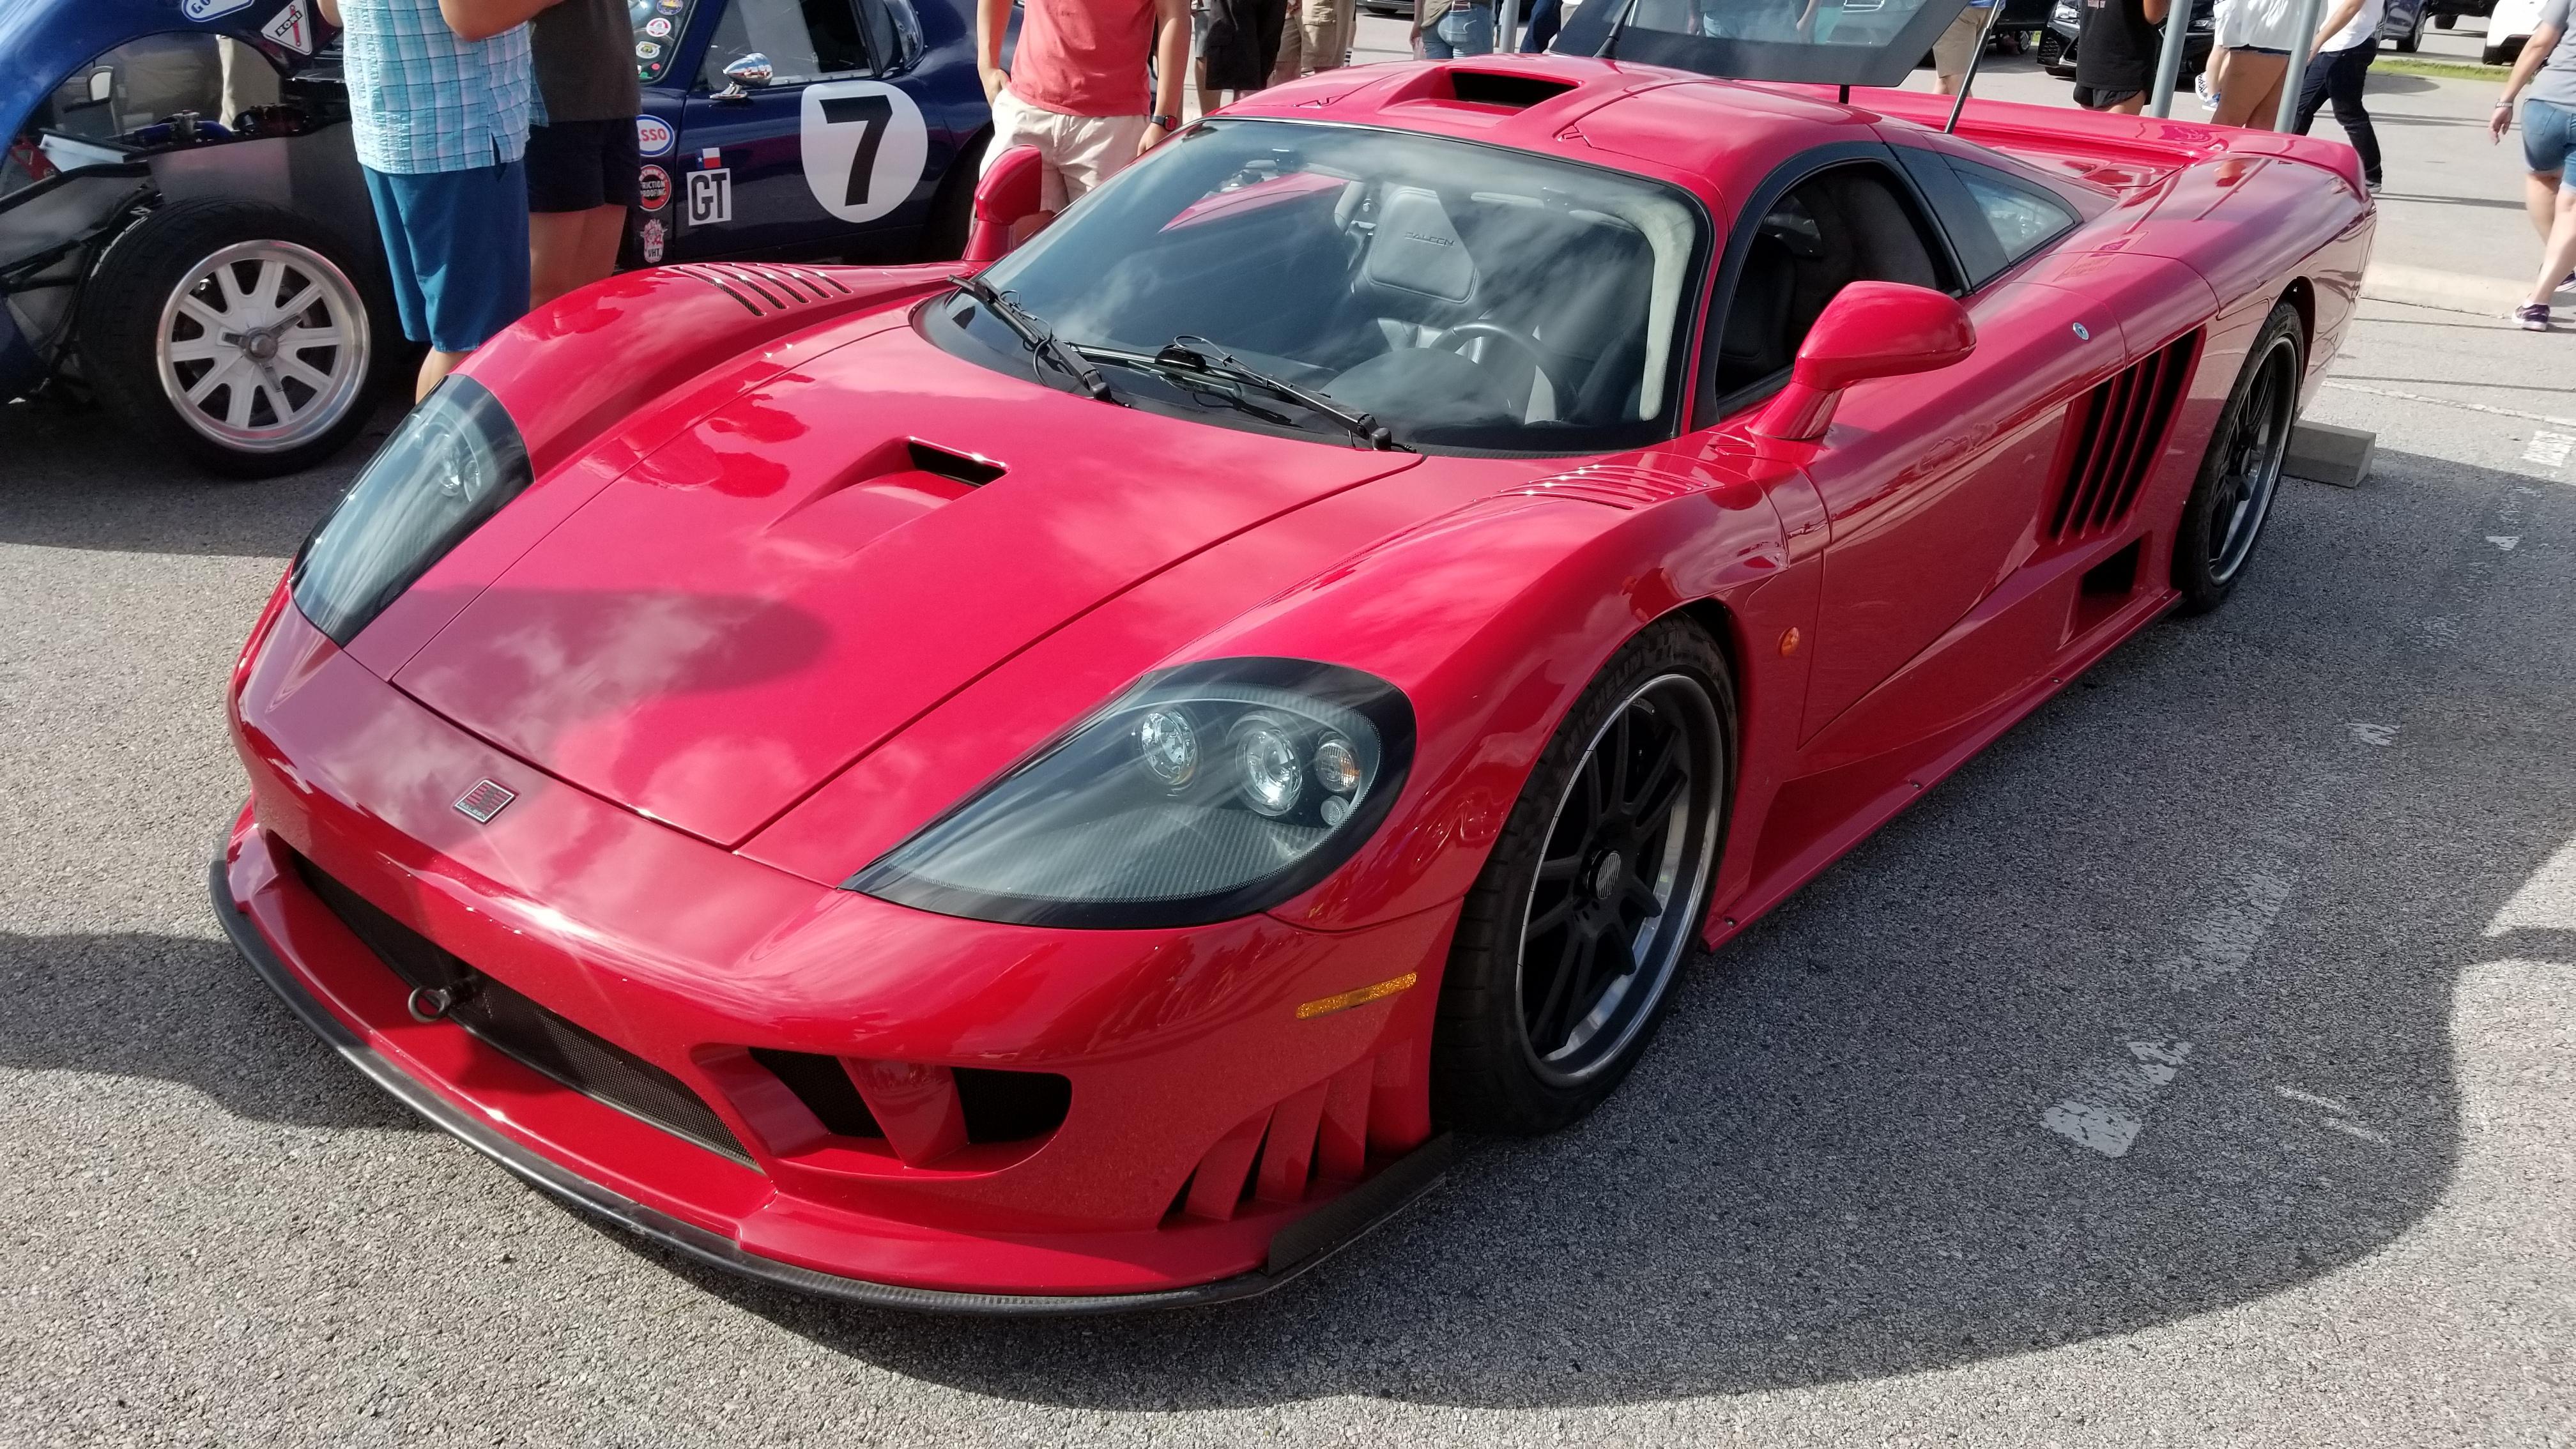 Saleen S7 Logo - Saleen S7 at the last Austin Cars and Coffee : Autos